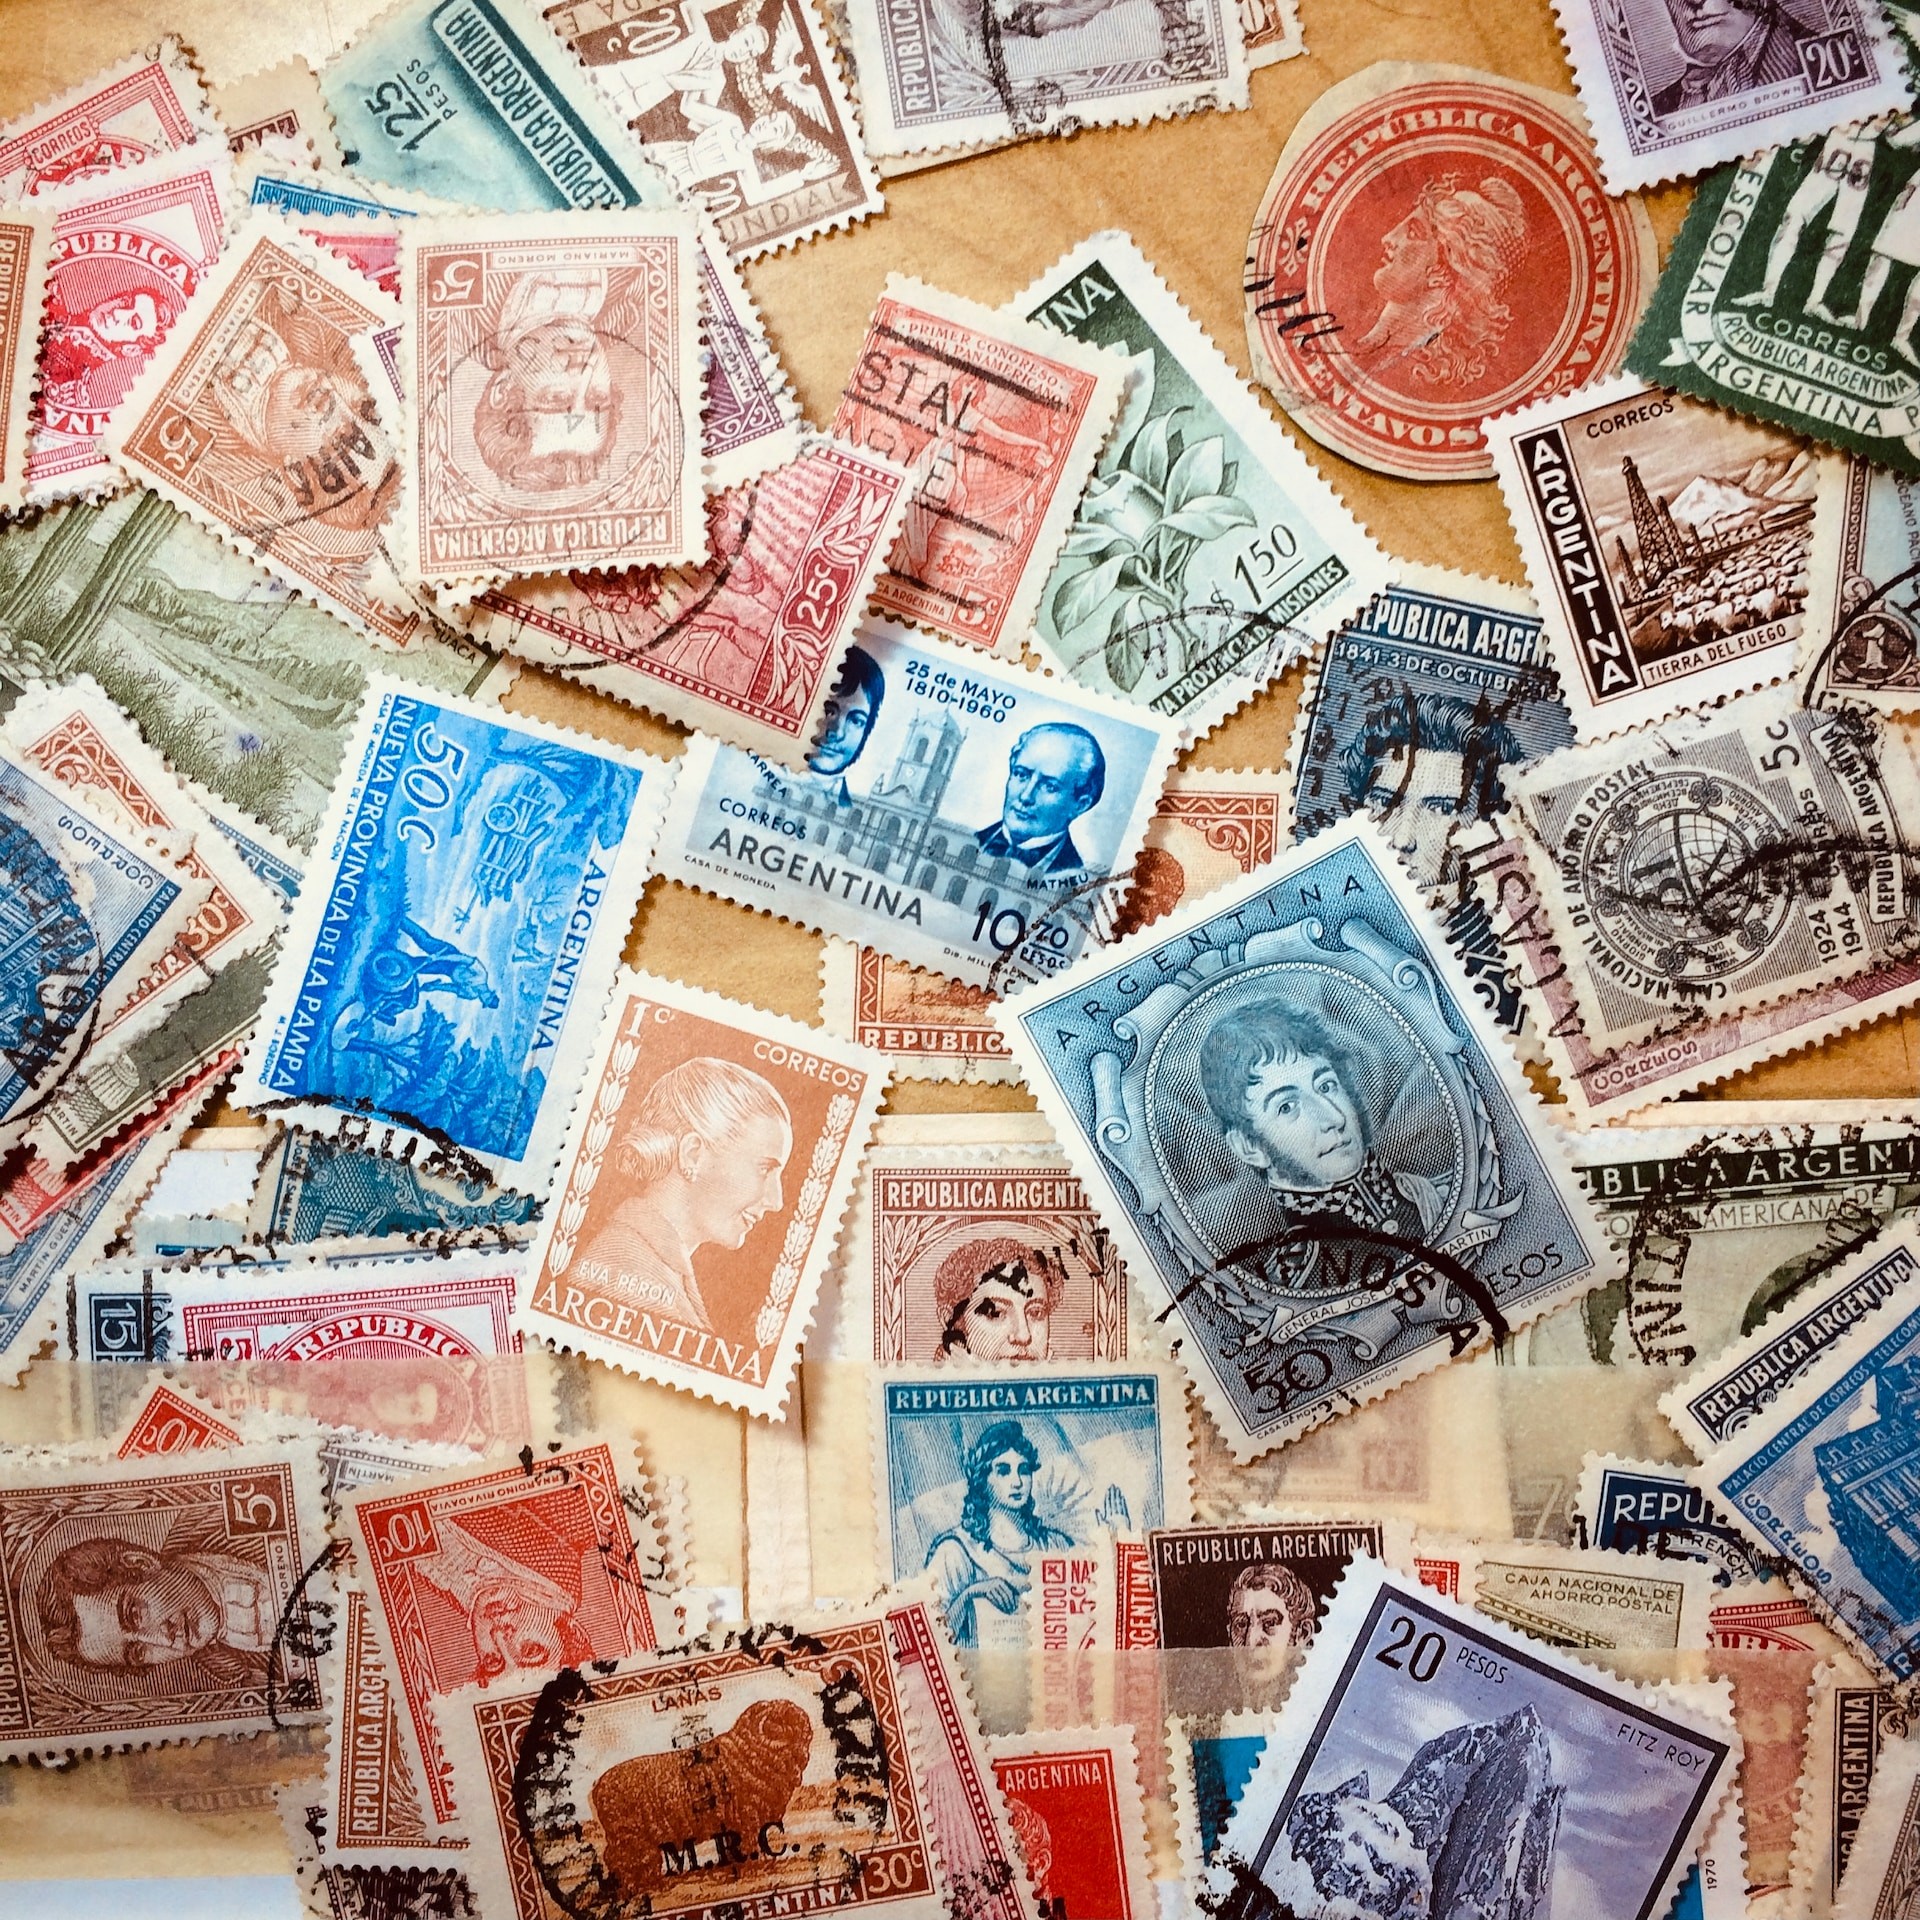 Why No Living People Appear On US Postage Stamps